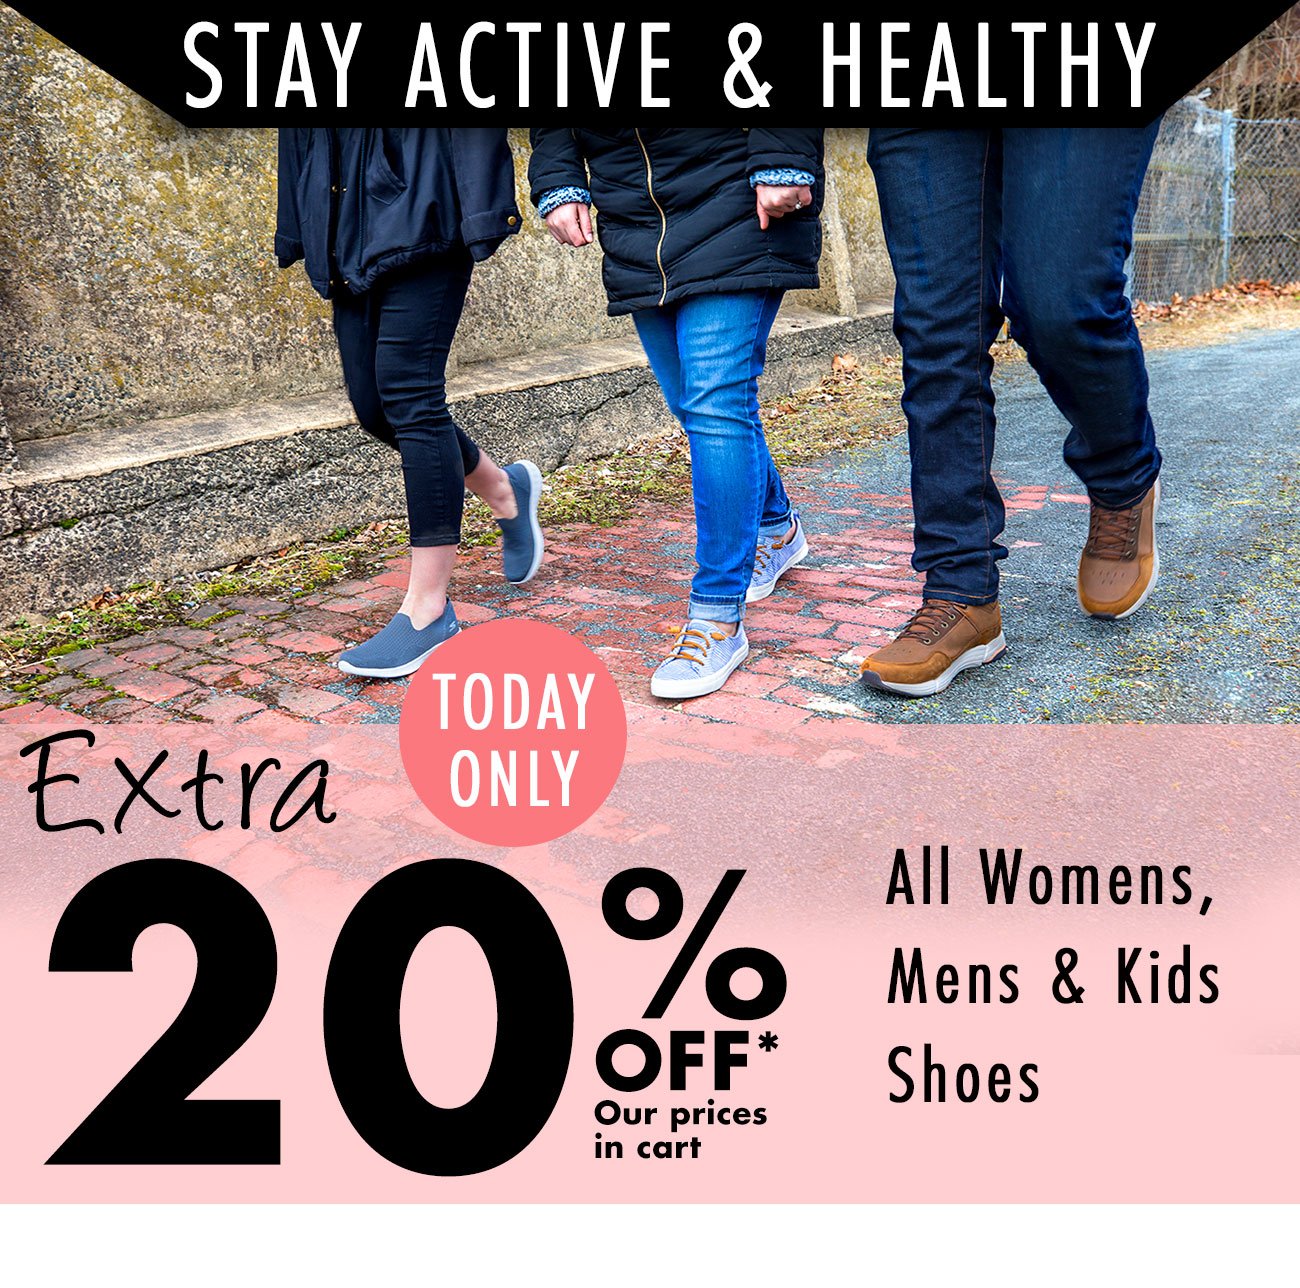 Enjoy an EXTRA 20% OFF shoes for Women 